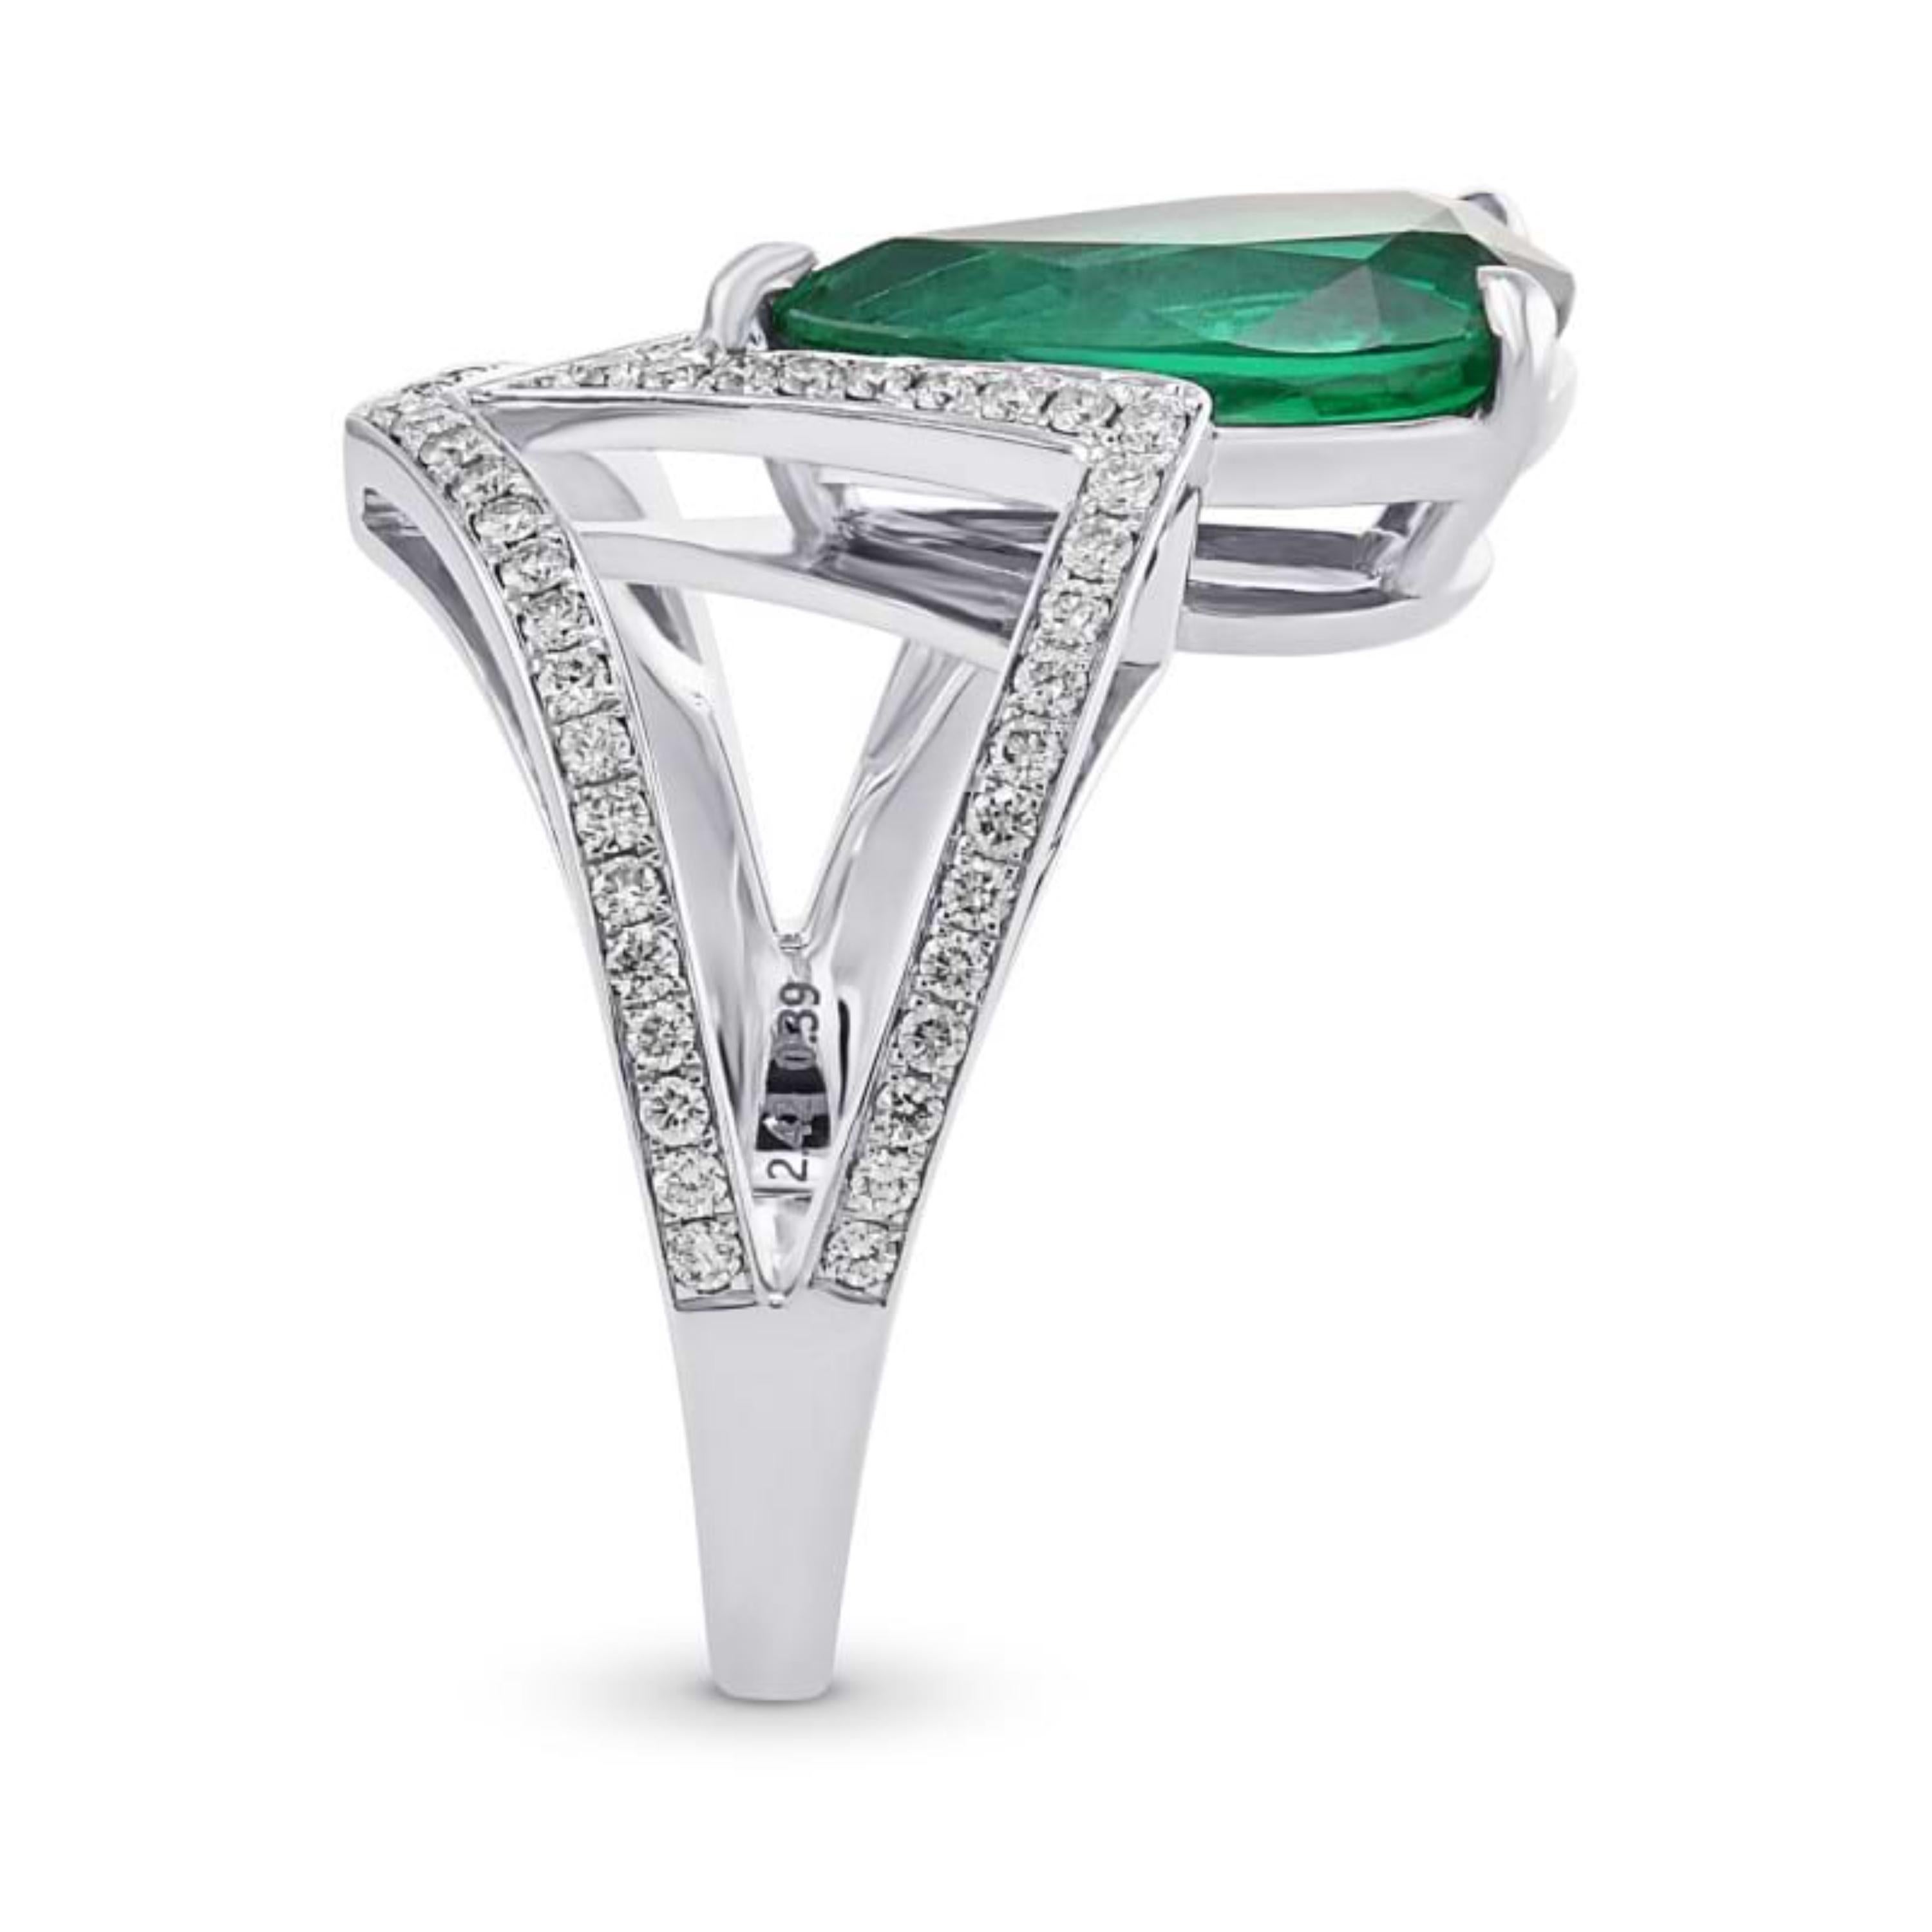 Women's Art Deco Style 2.55 Carat Pear Cut Natural Emerald Diamond Cocktail Ring Band For Sale